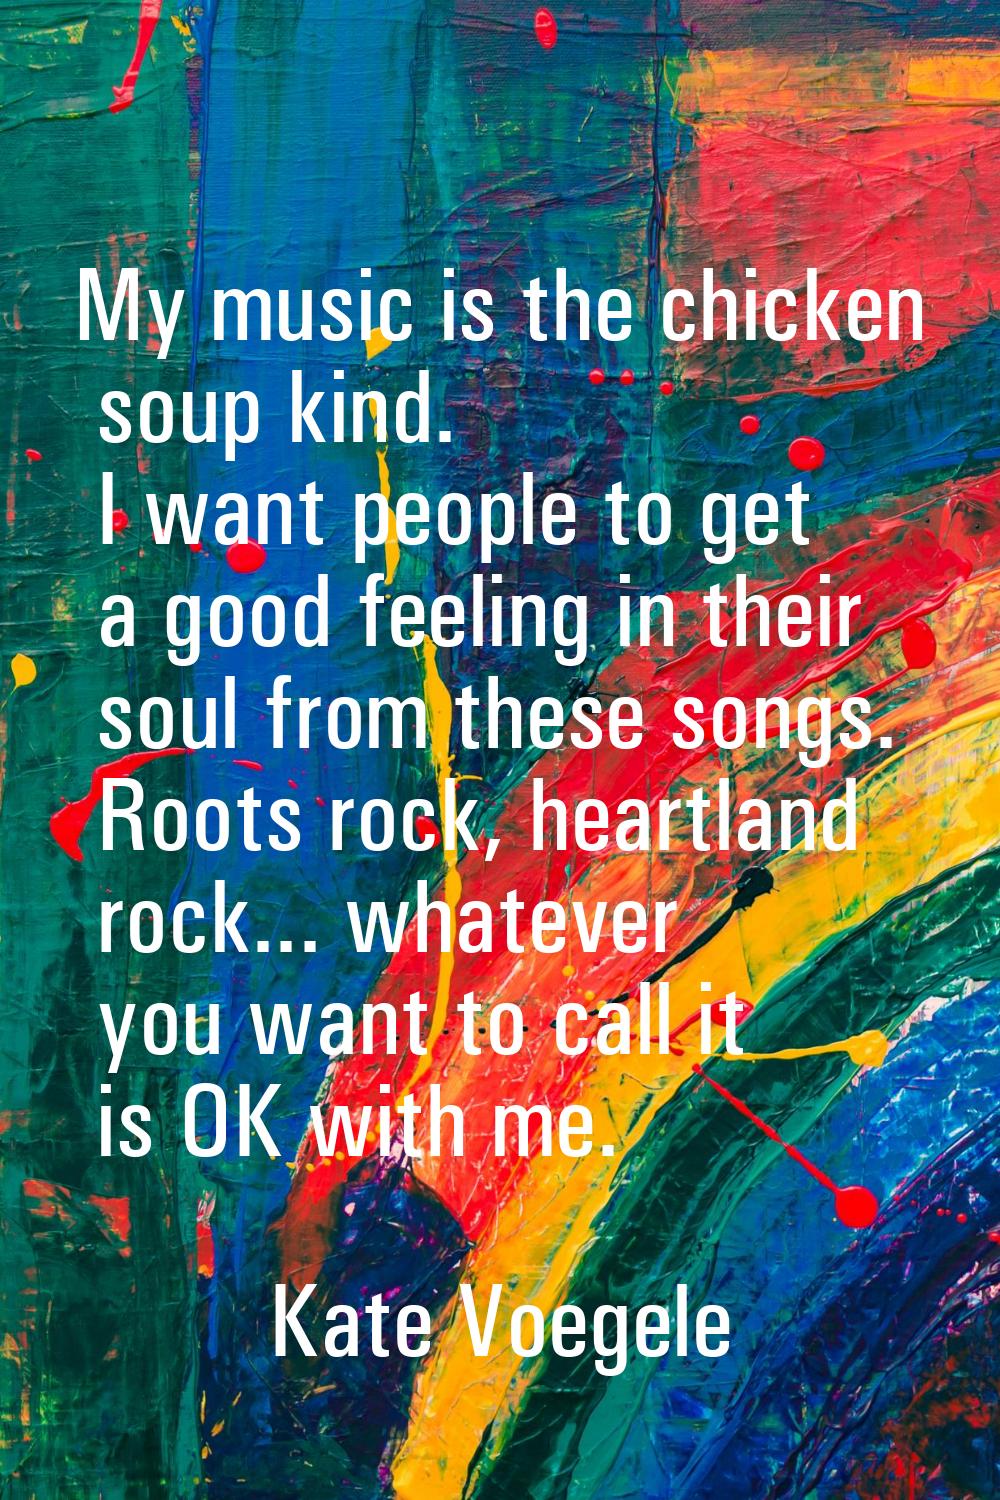 My music is the chicken soup kind. I want people to get a good feeling in their soul from these son